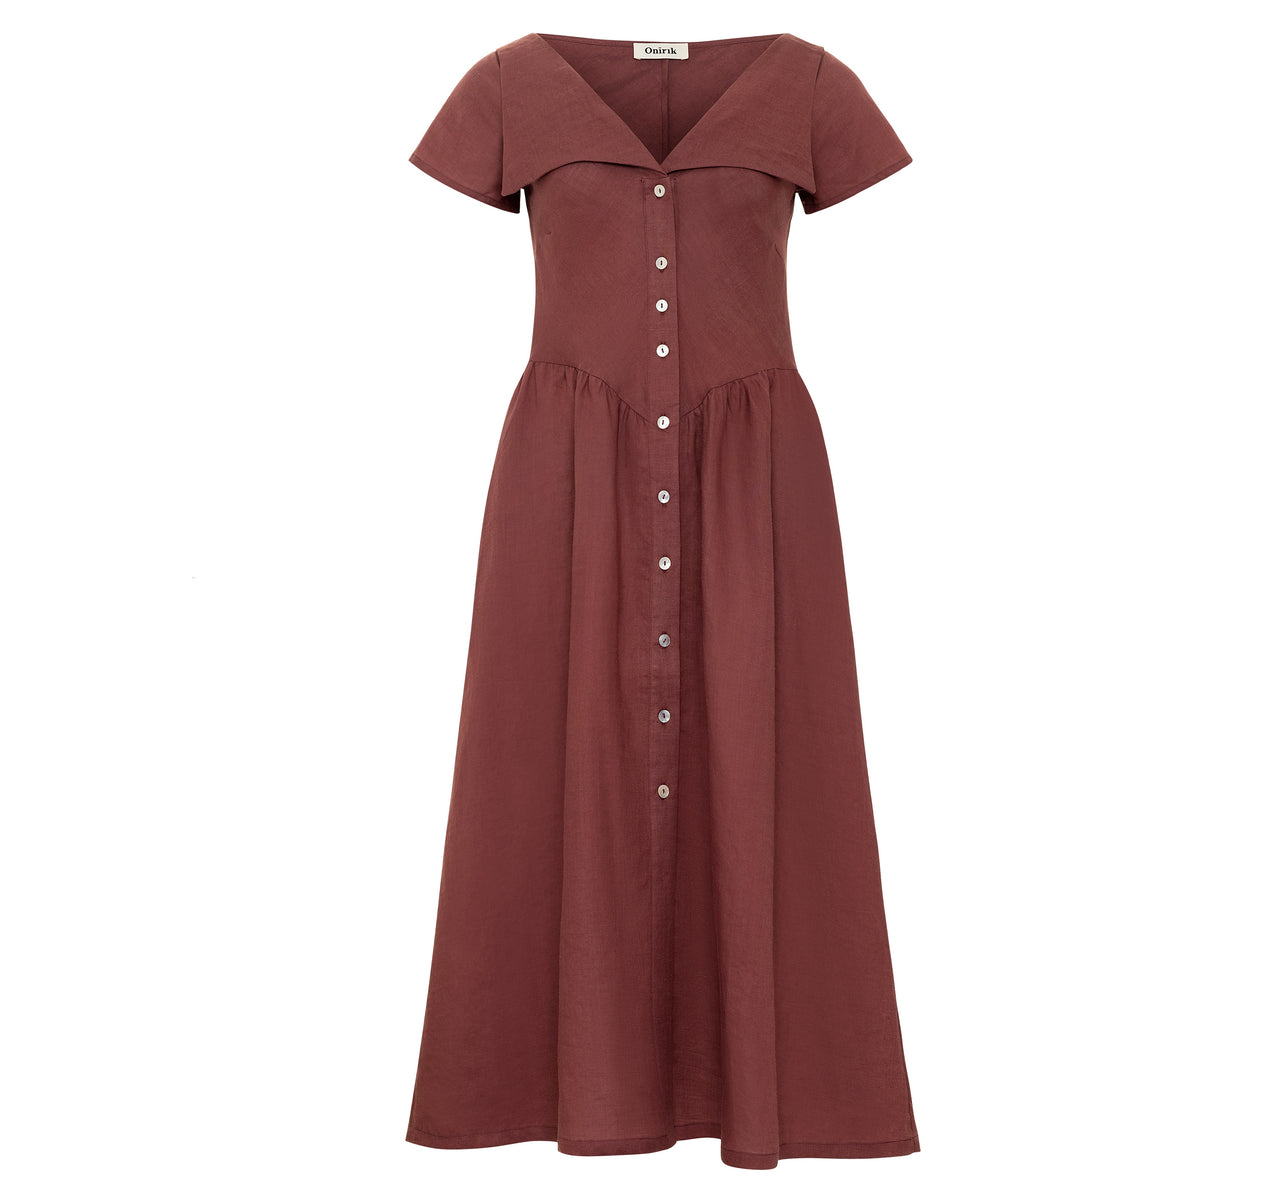 Helena Dress / 100% Linen in Plum with Shell Buttons